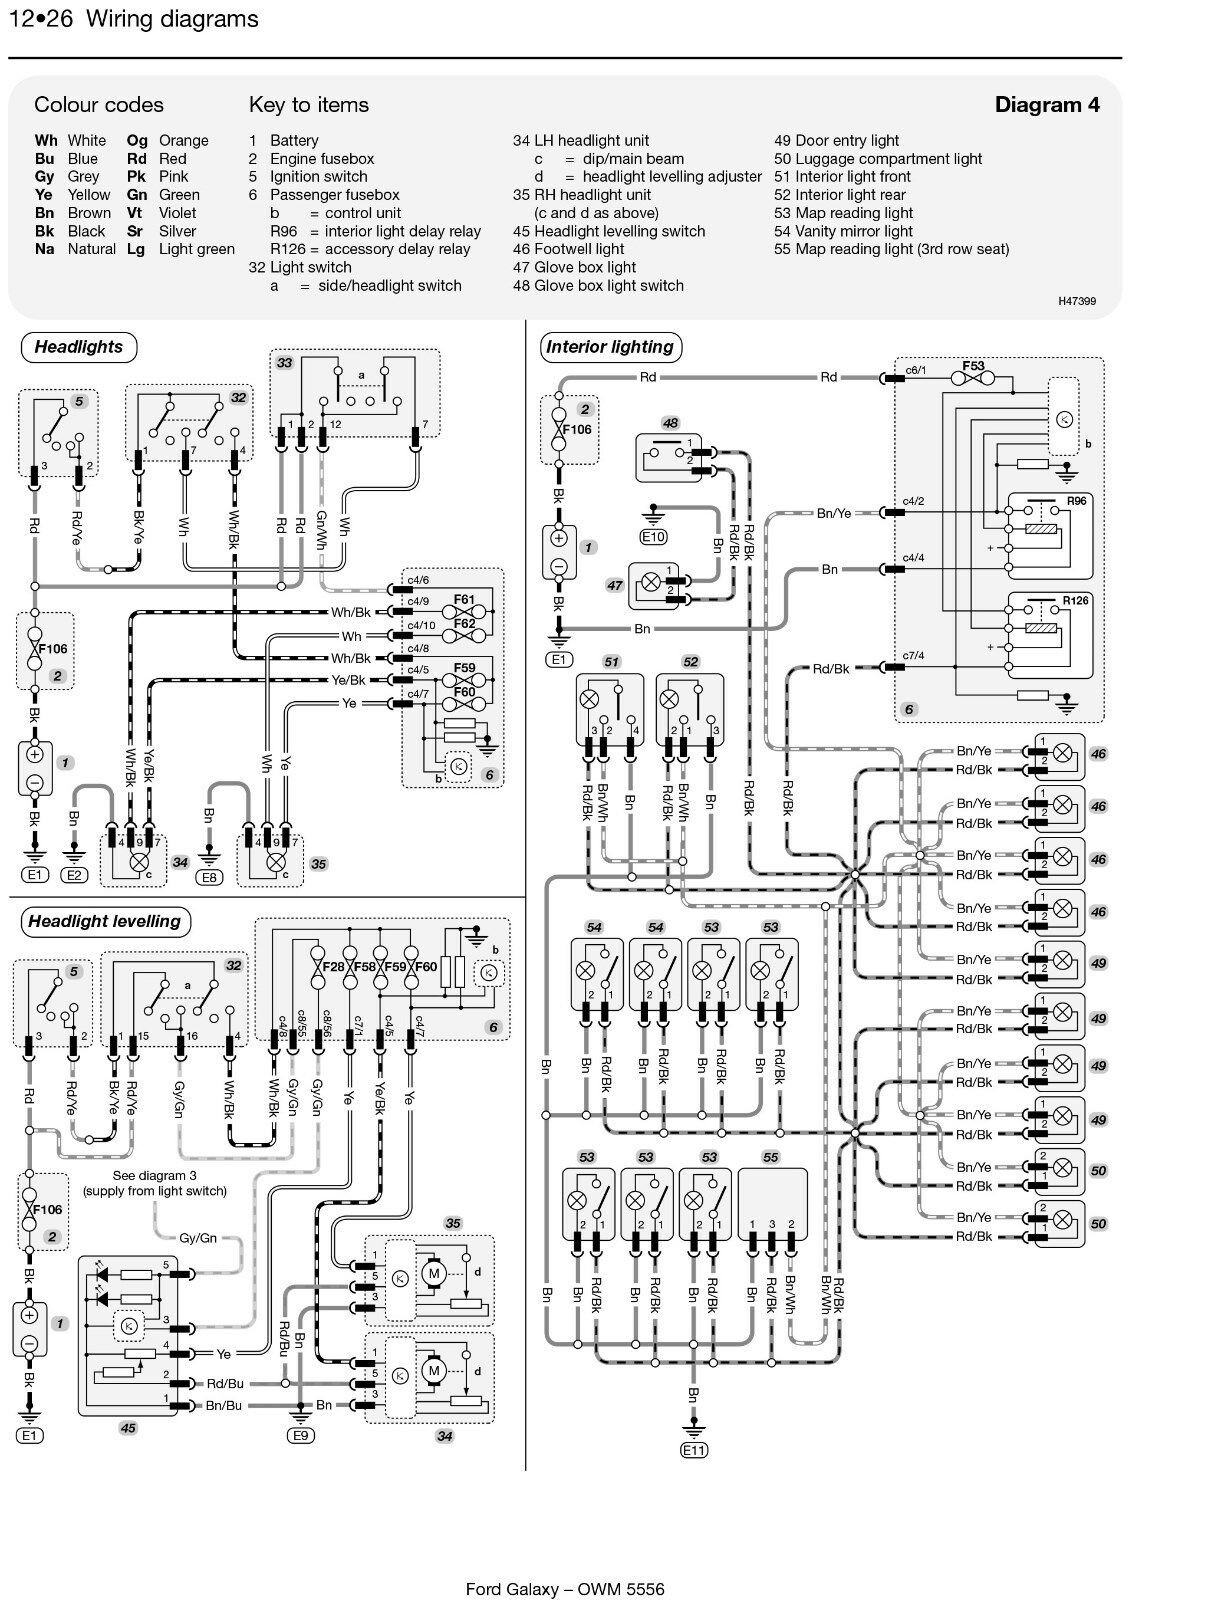 Citroen Picasso Engine Diagram Wiring Diagram ford Galaxy 2002 Daily Update Wiring Diagram Of Citroen Picasso Engine Diagram